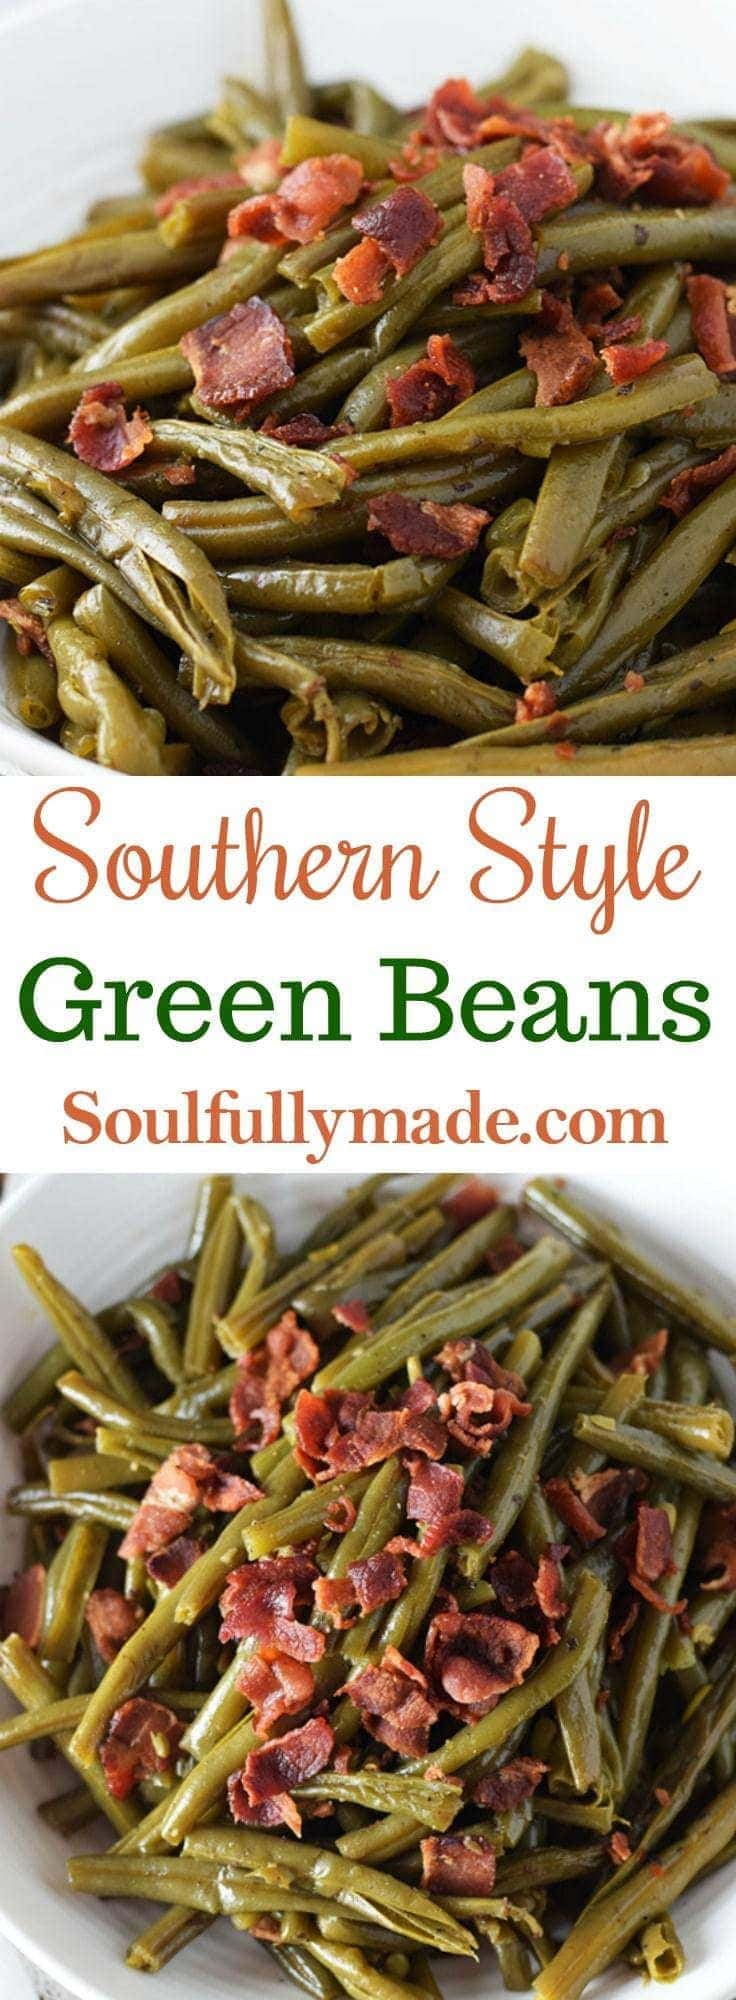 Southern Style Green Beans - Soulfully Made